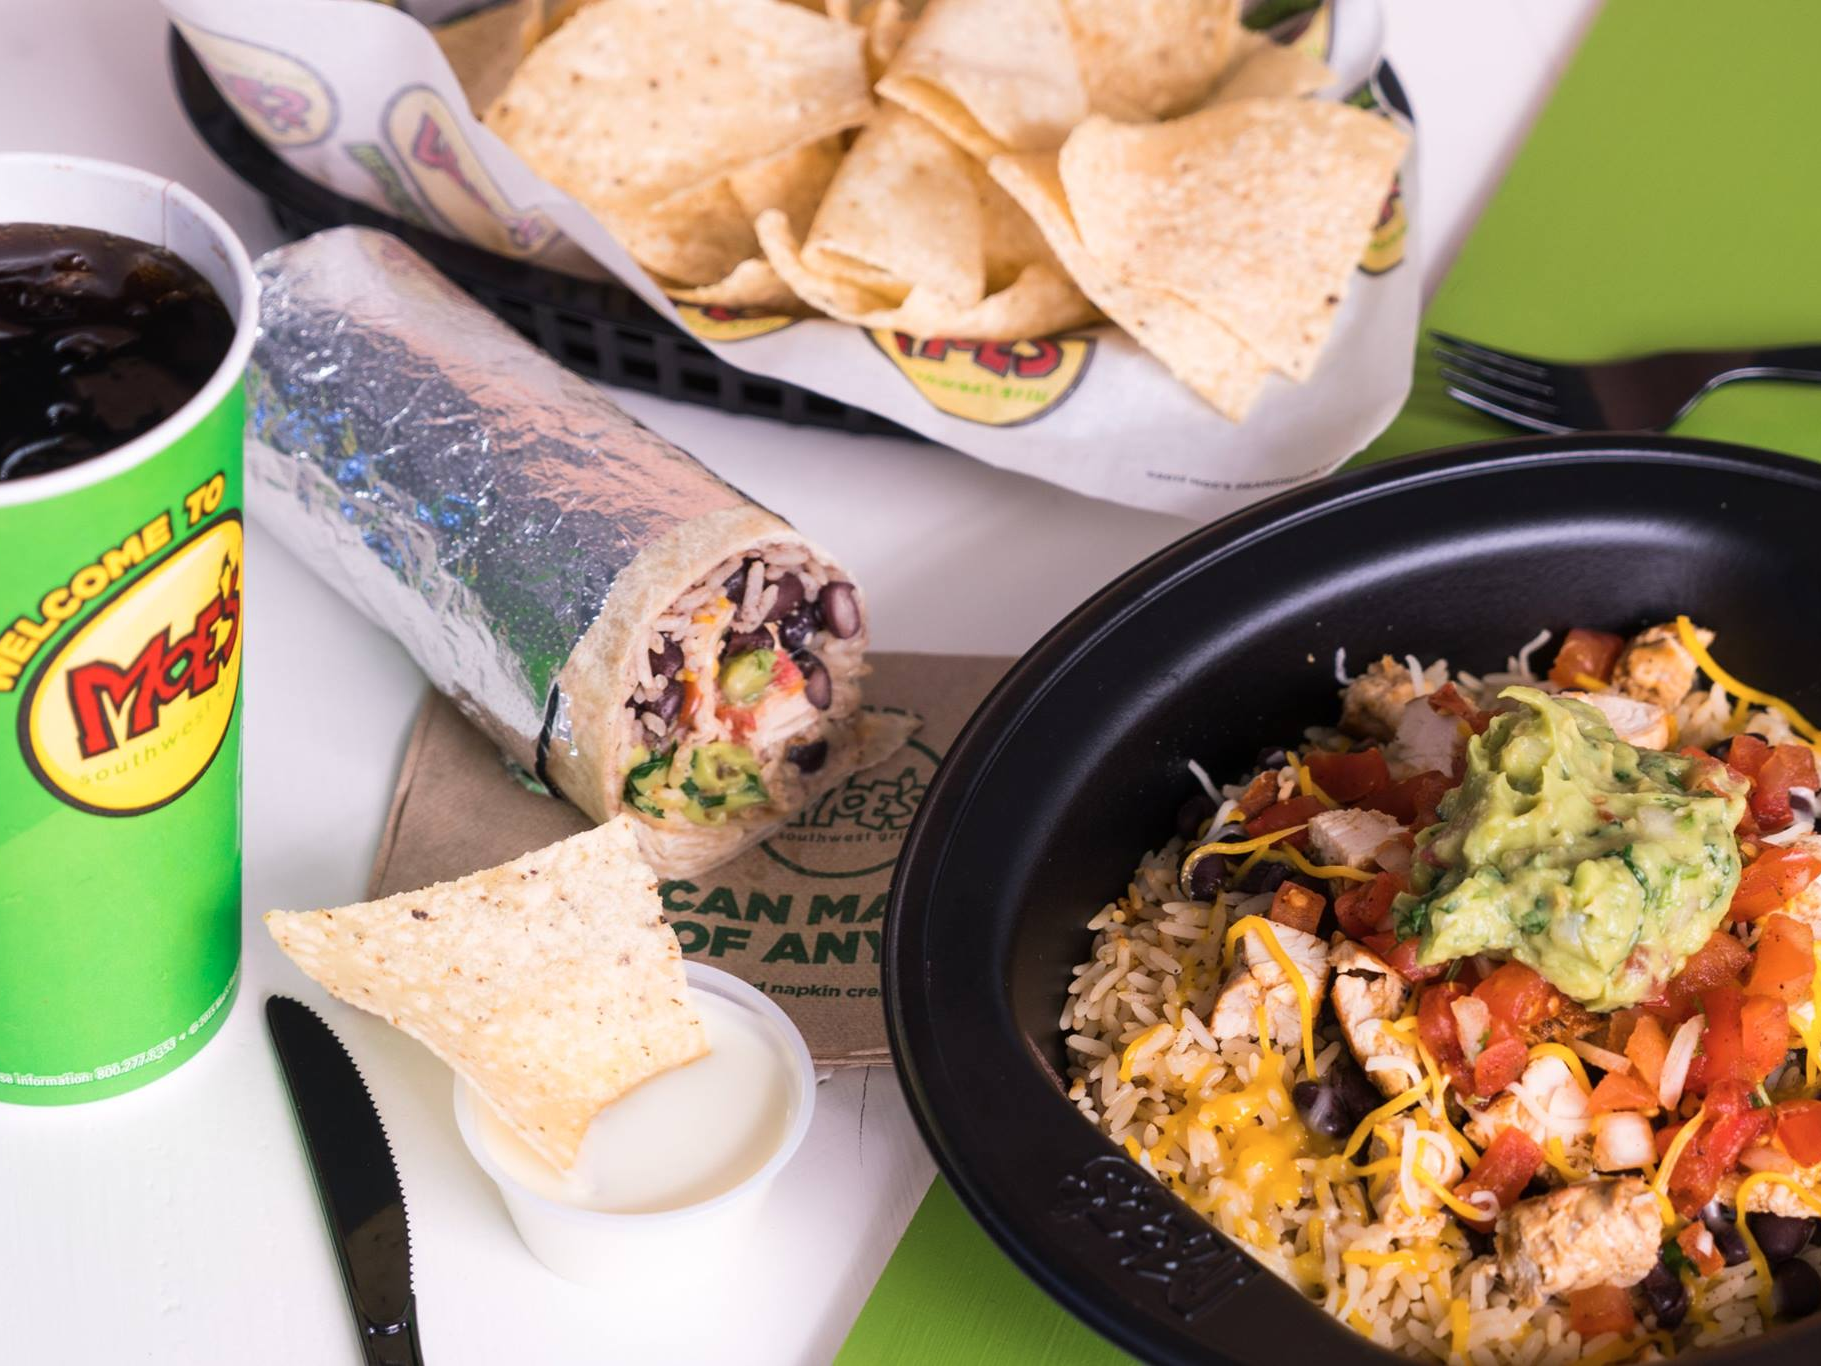 Moe's beats Chipotle in Harris Poll - Business Insider - Business Insider